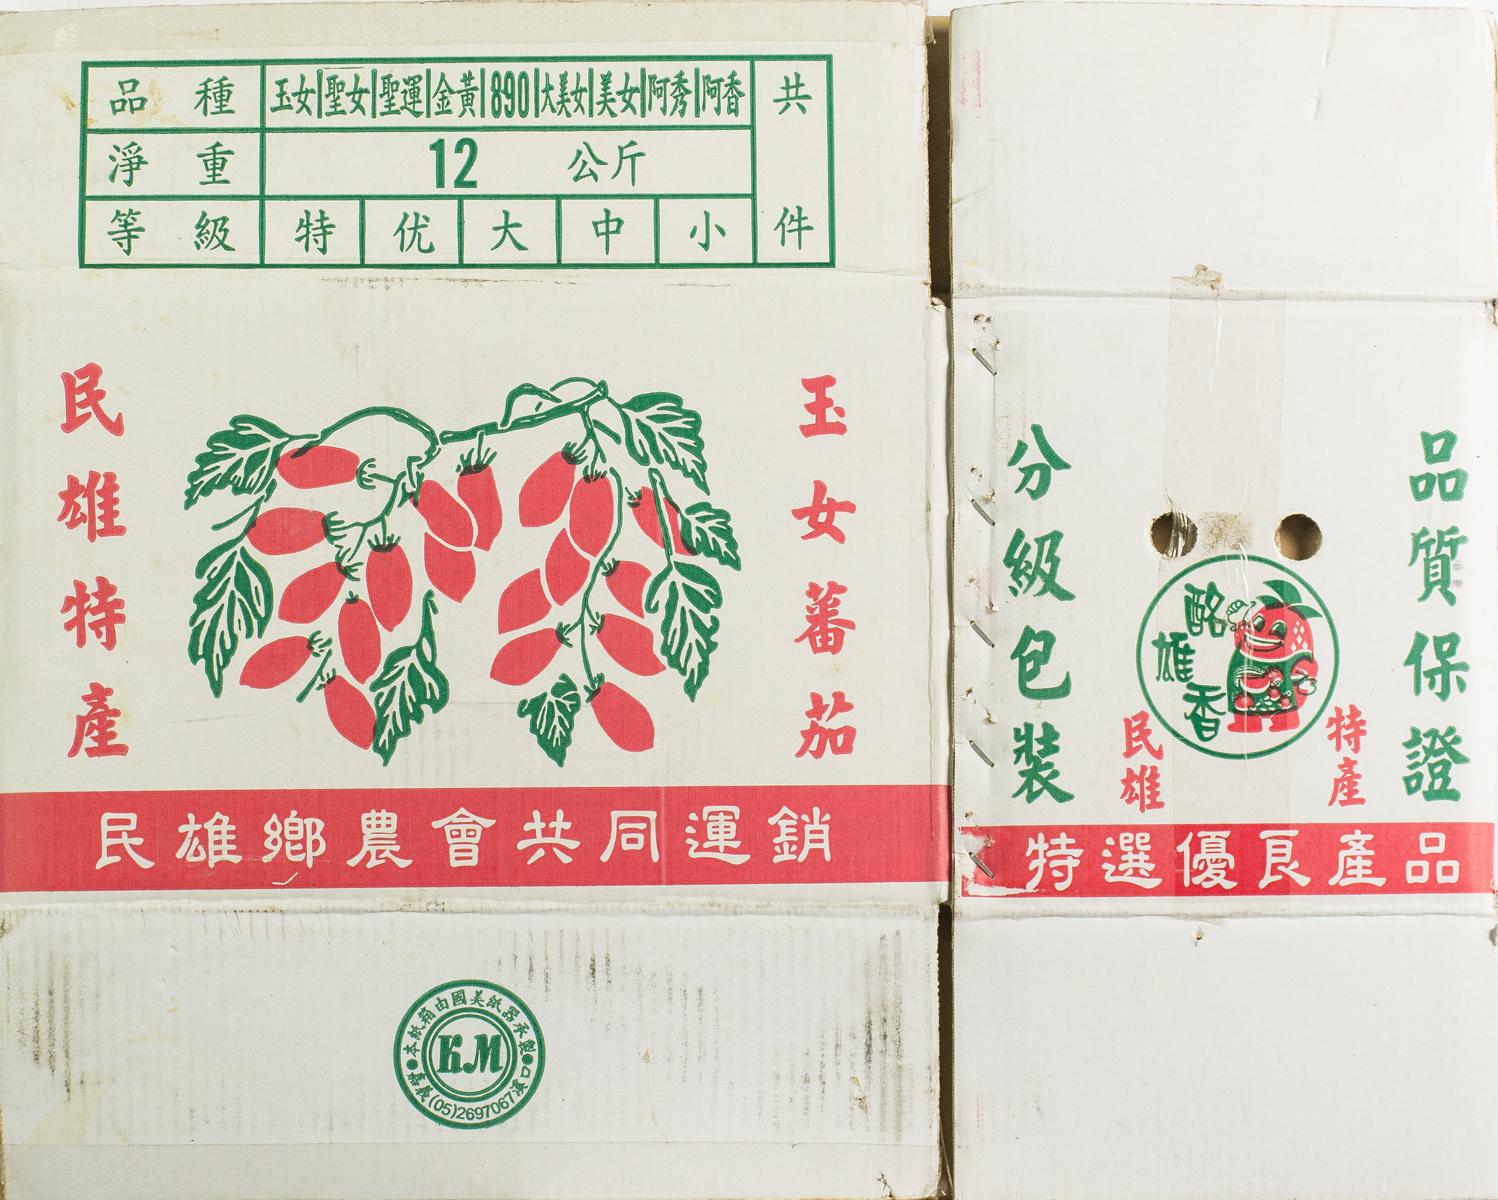 Cardboard box used to pack cherry tomatoes produced in Minxiong, Southern Taiwan